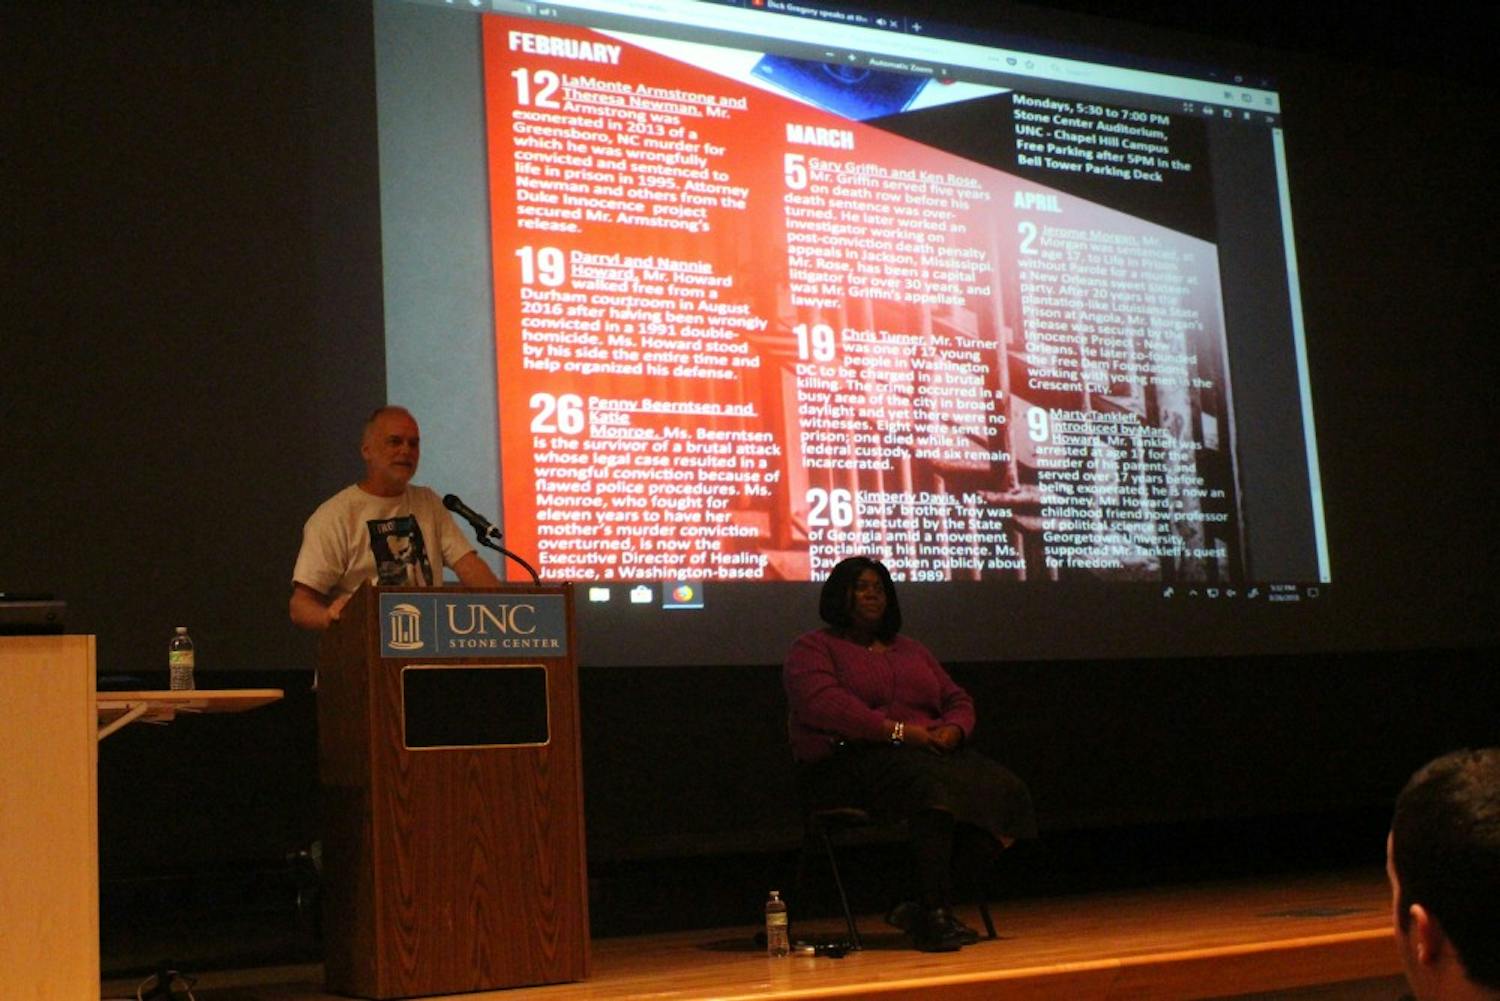 Professor Frank Baumgartner, from the department of political science, introduces Kimberly Davis to speak about her brother, who was sentenced to death in the state of Georgia.